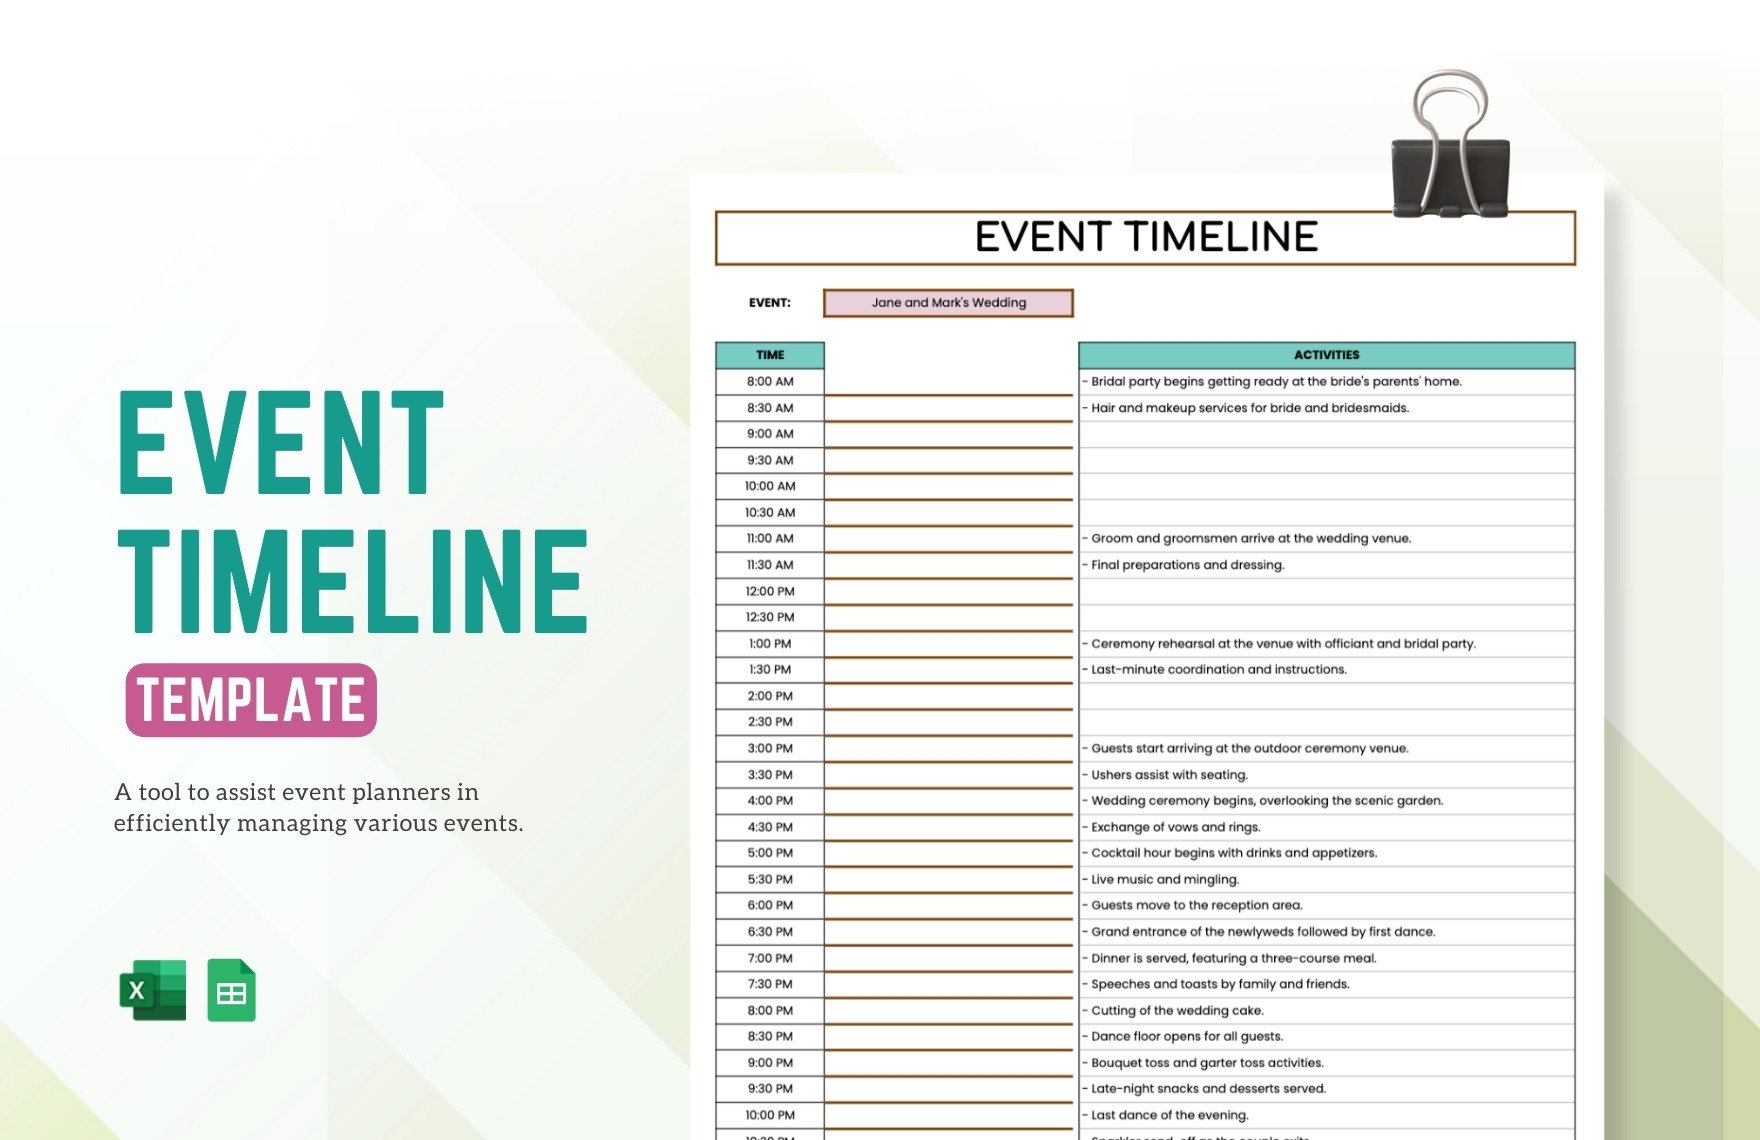 Event Timeline Template in Excel, Google Sheets